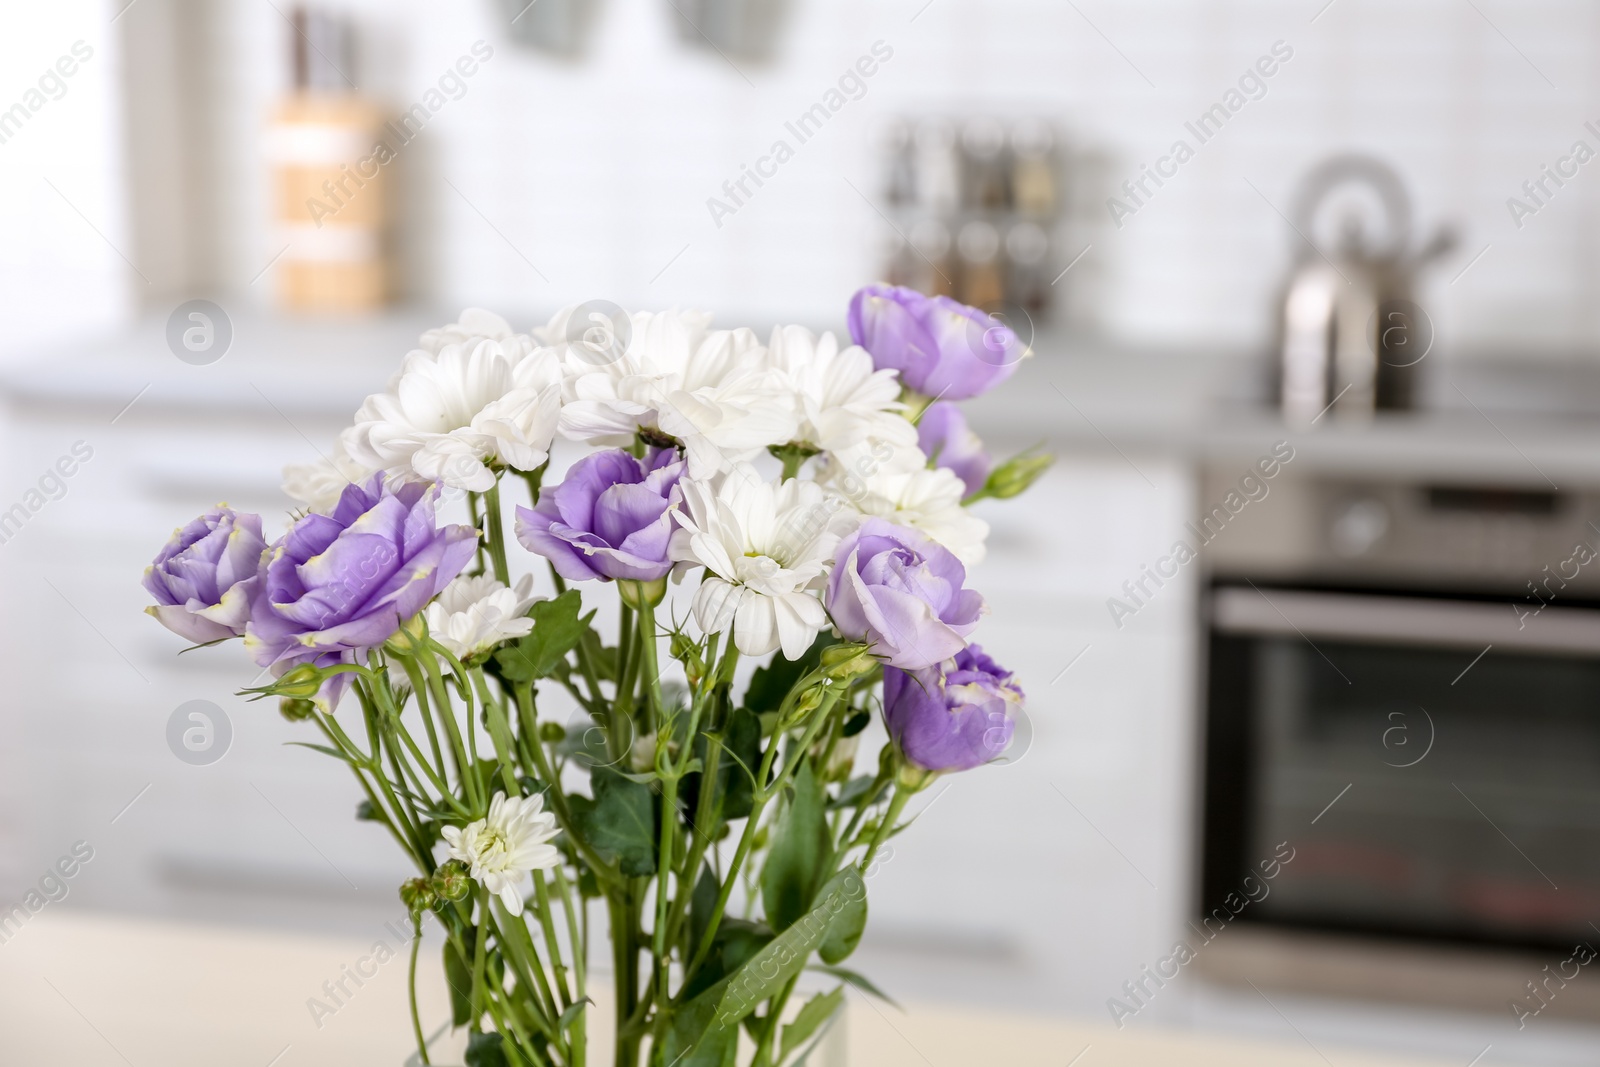 Photo of Vase with beautiful flowers in kitchen interior